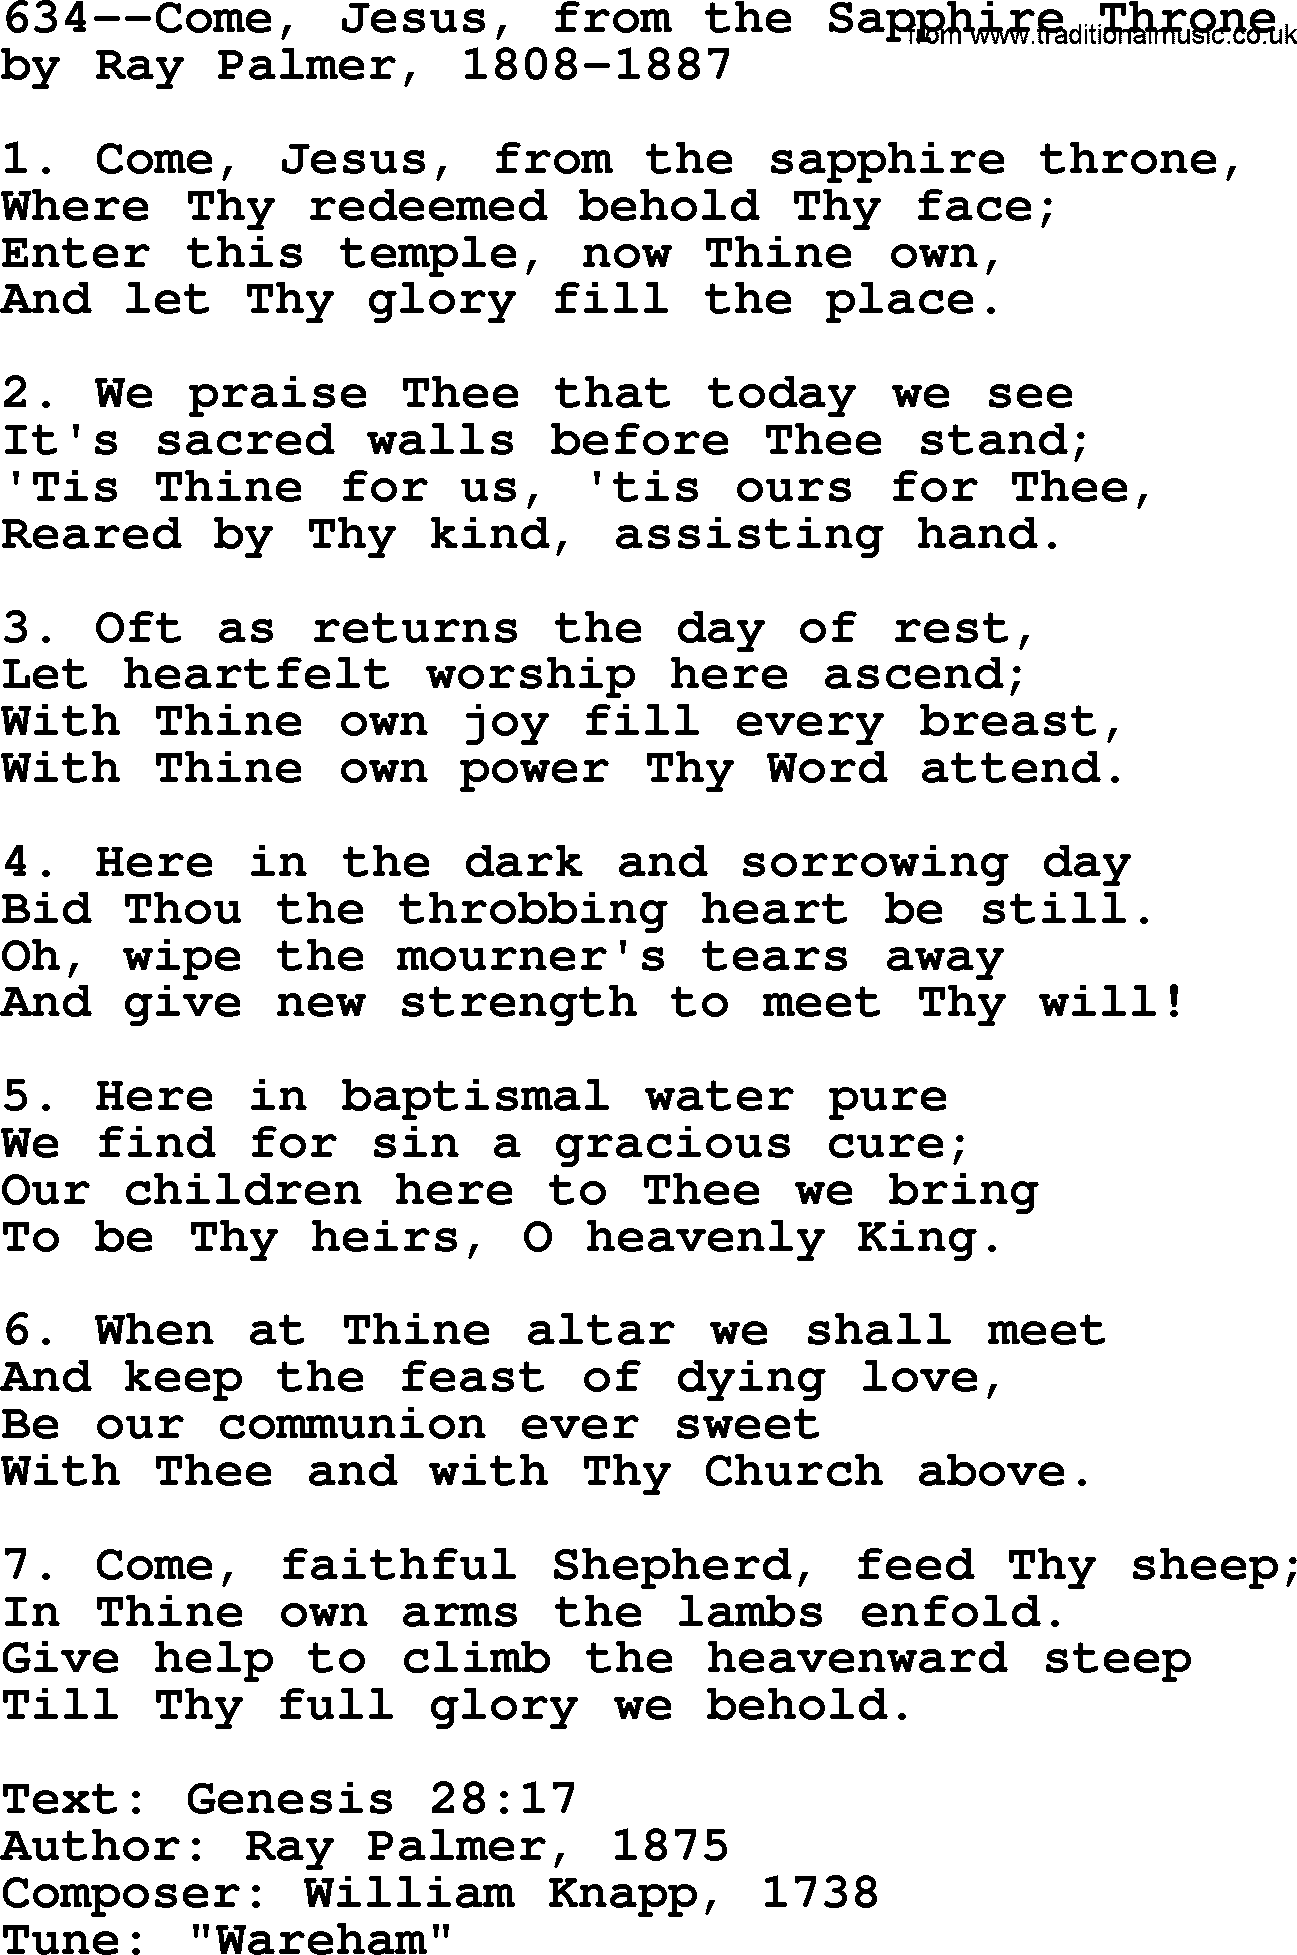 Lutheran Hymn: 634--Come, Jesus, from the Sapphire Throne.txt lyrics with PDF